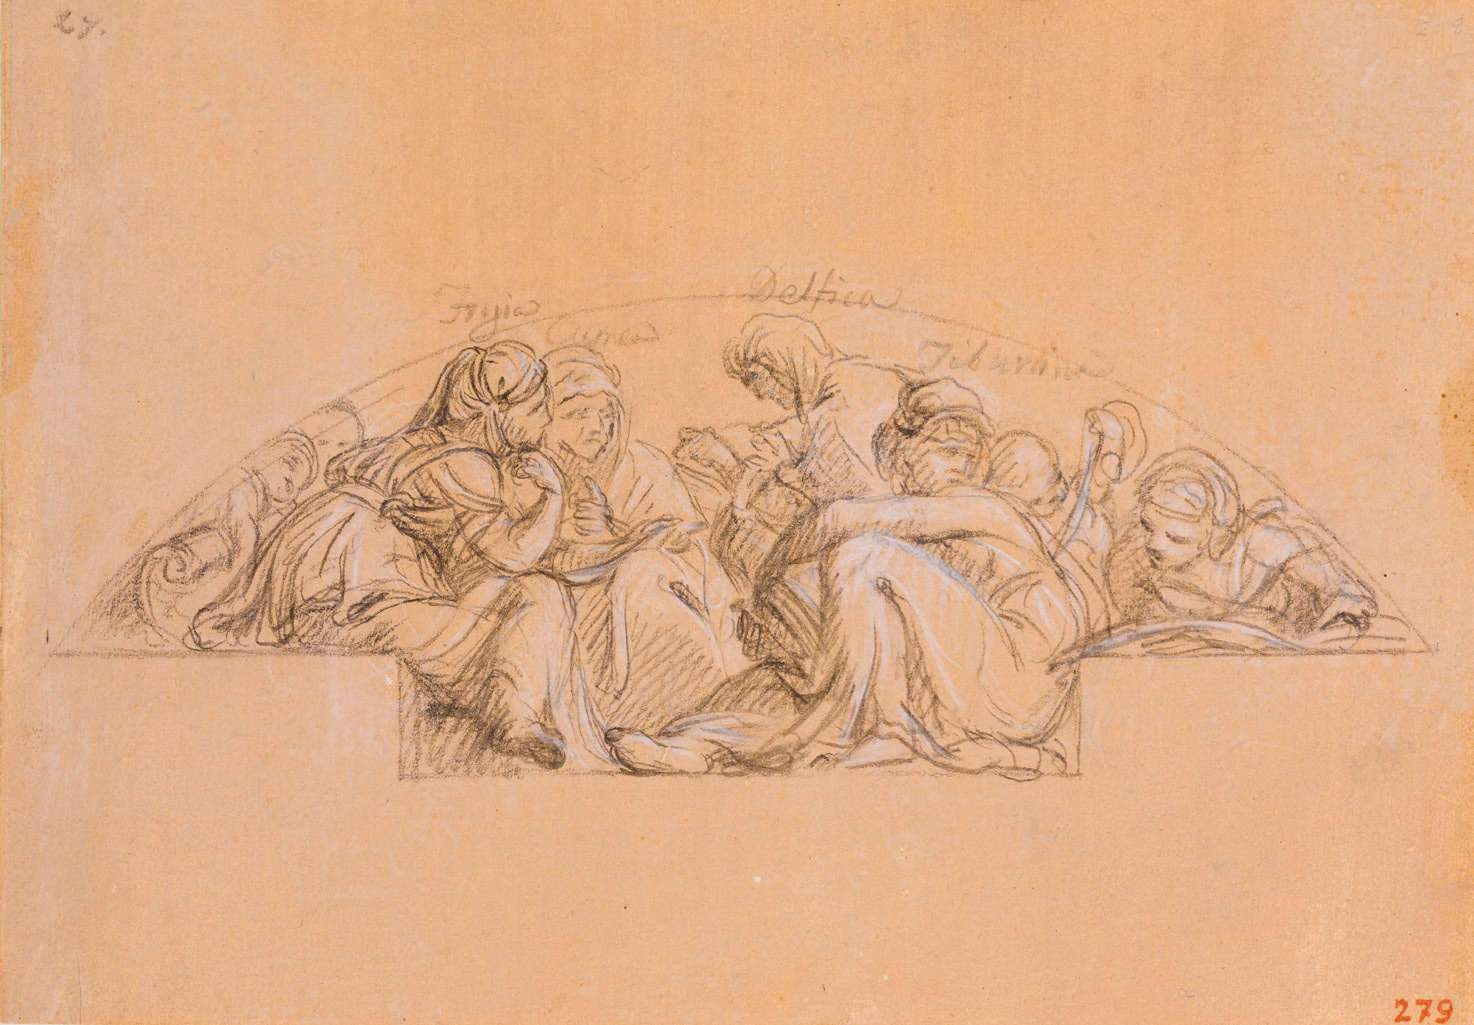 Bernardino and Pietro Nocchi's drawings on display in Lucca, the elegance of the neoclassical stroke